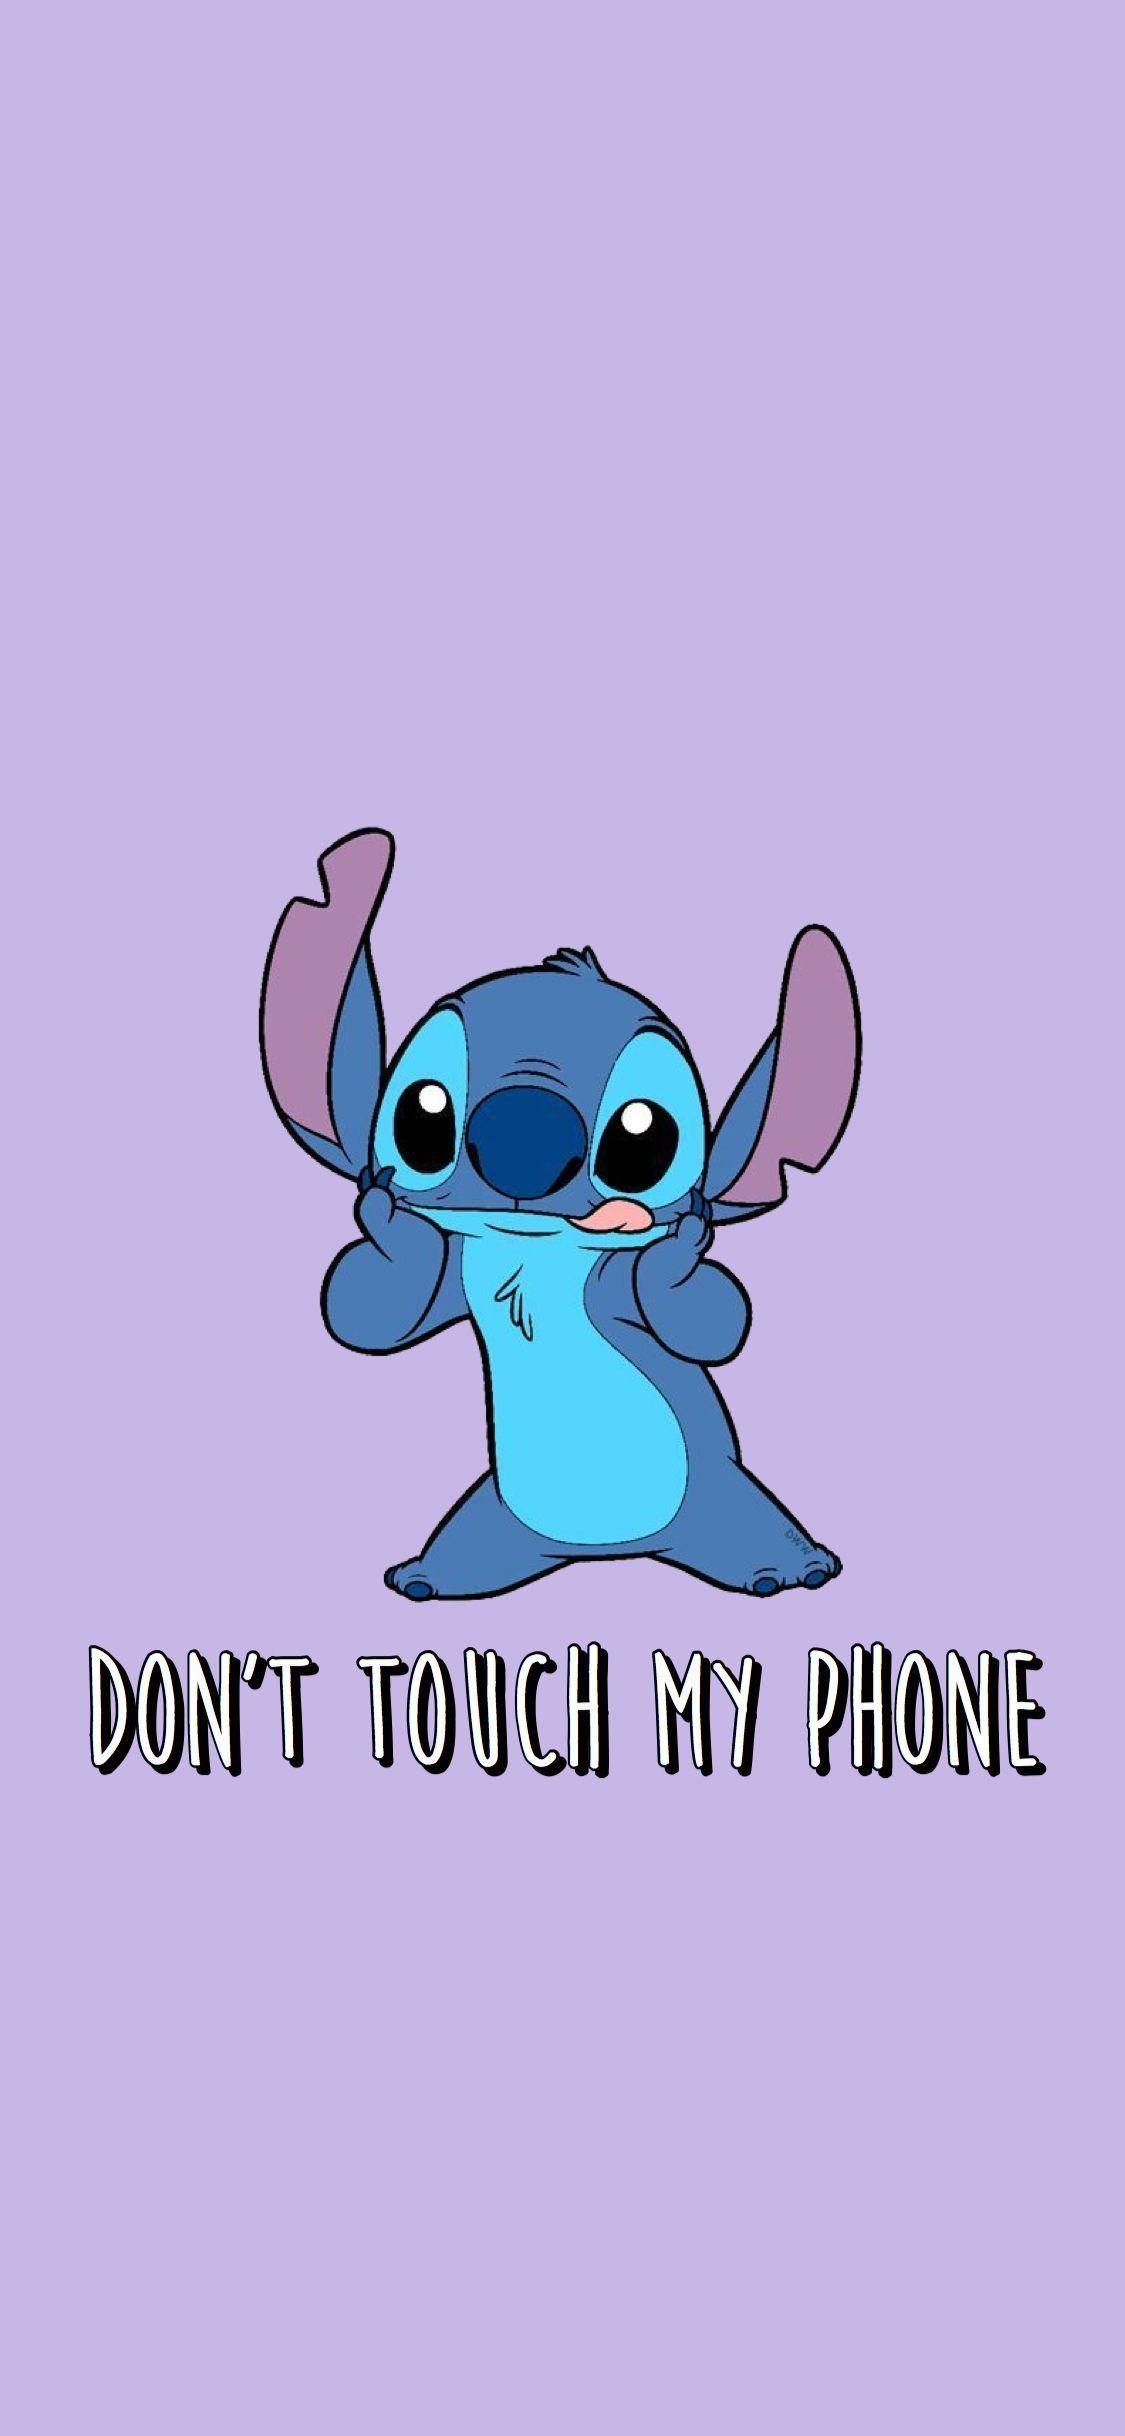 Password Stitch Wallpaper Dont Touch My Phone - Gamer 4 Everbr